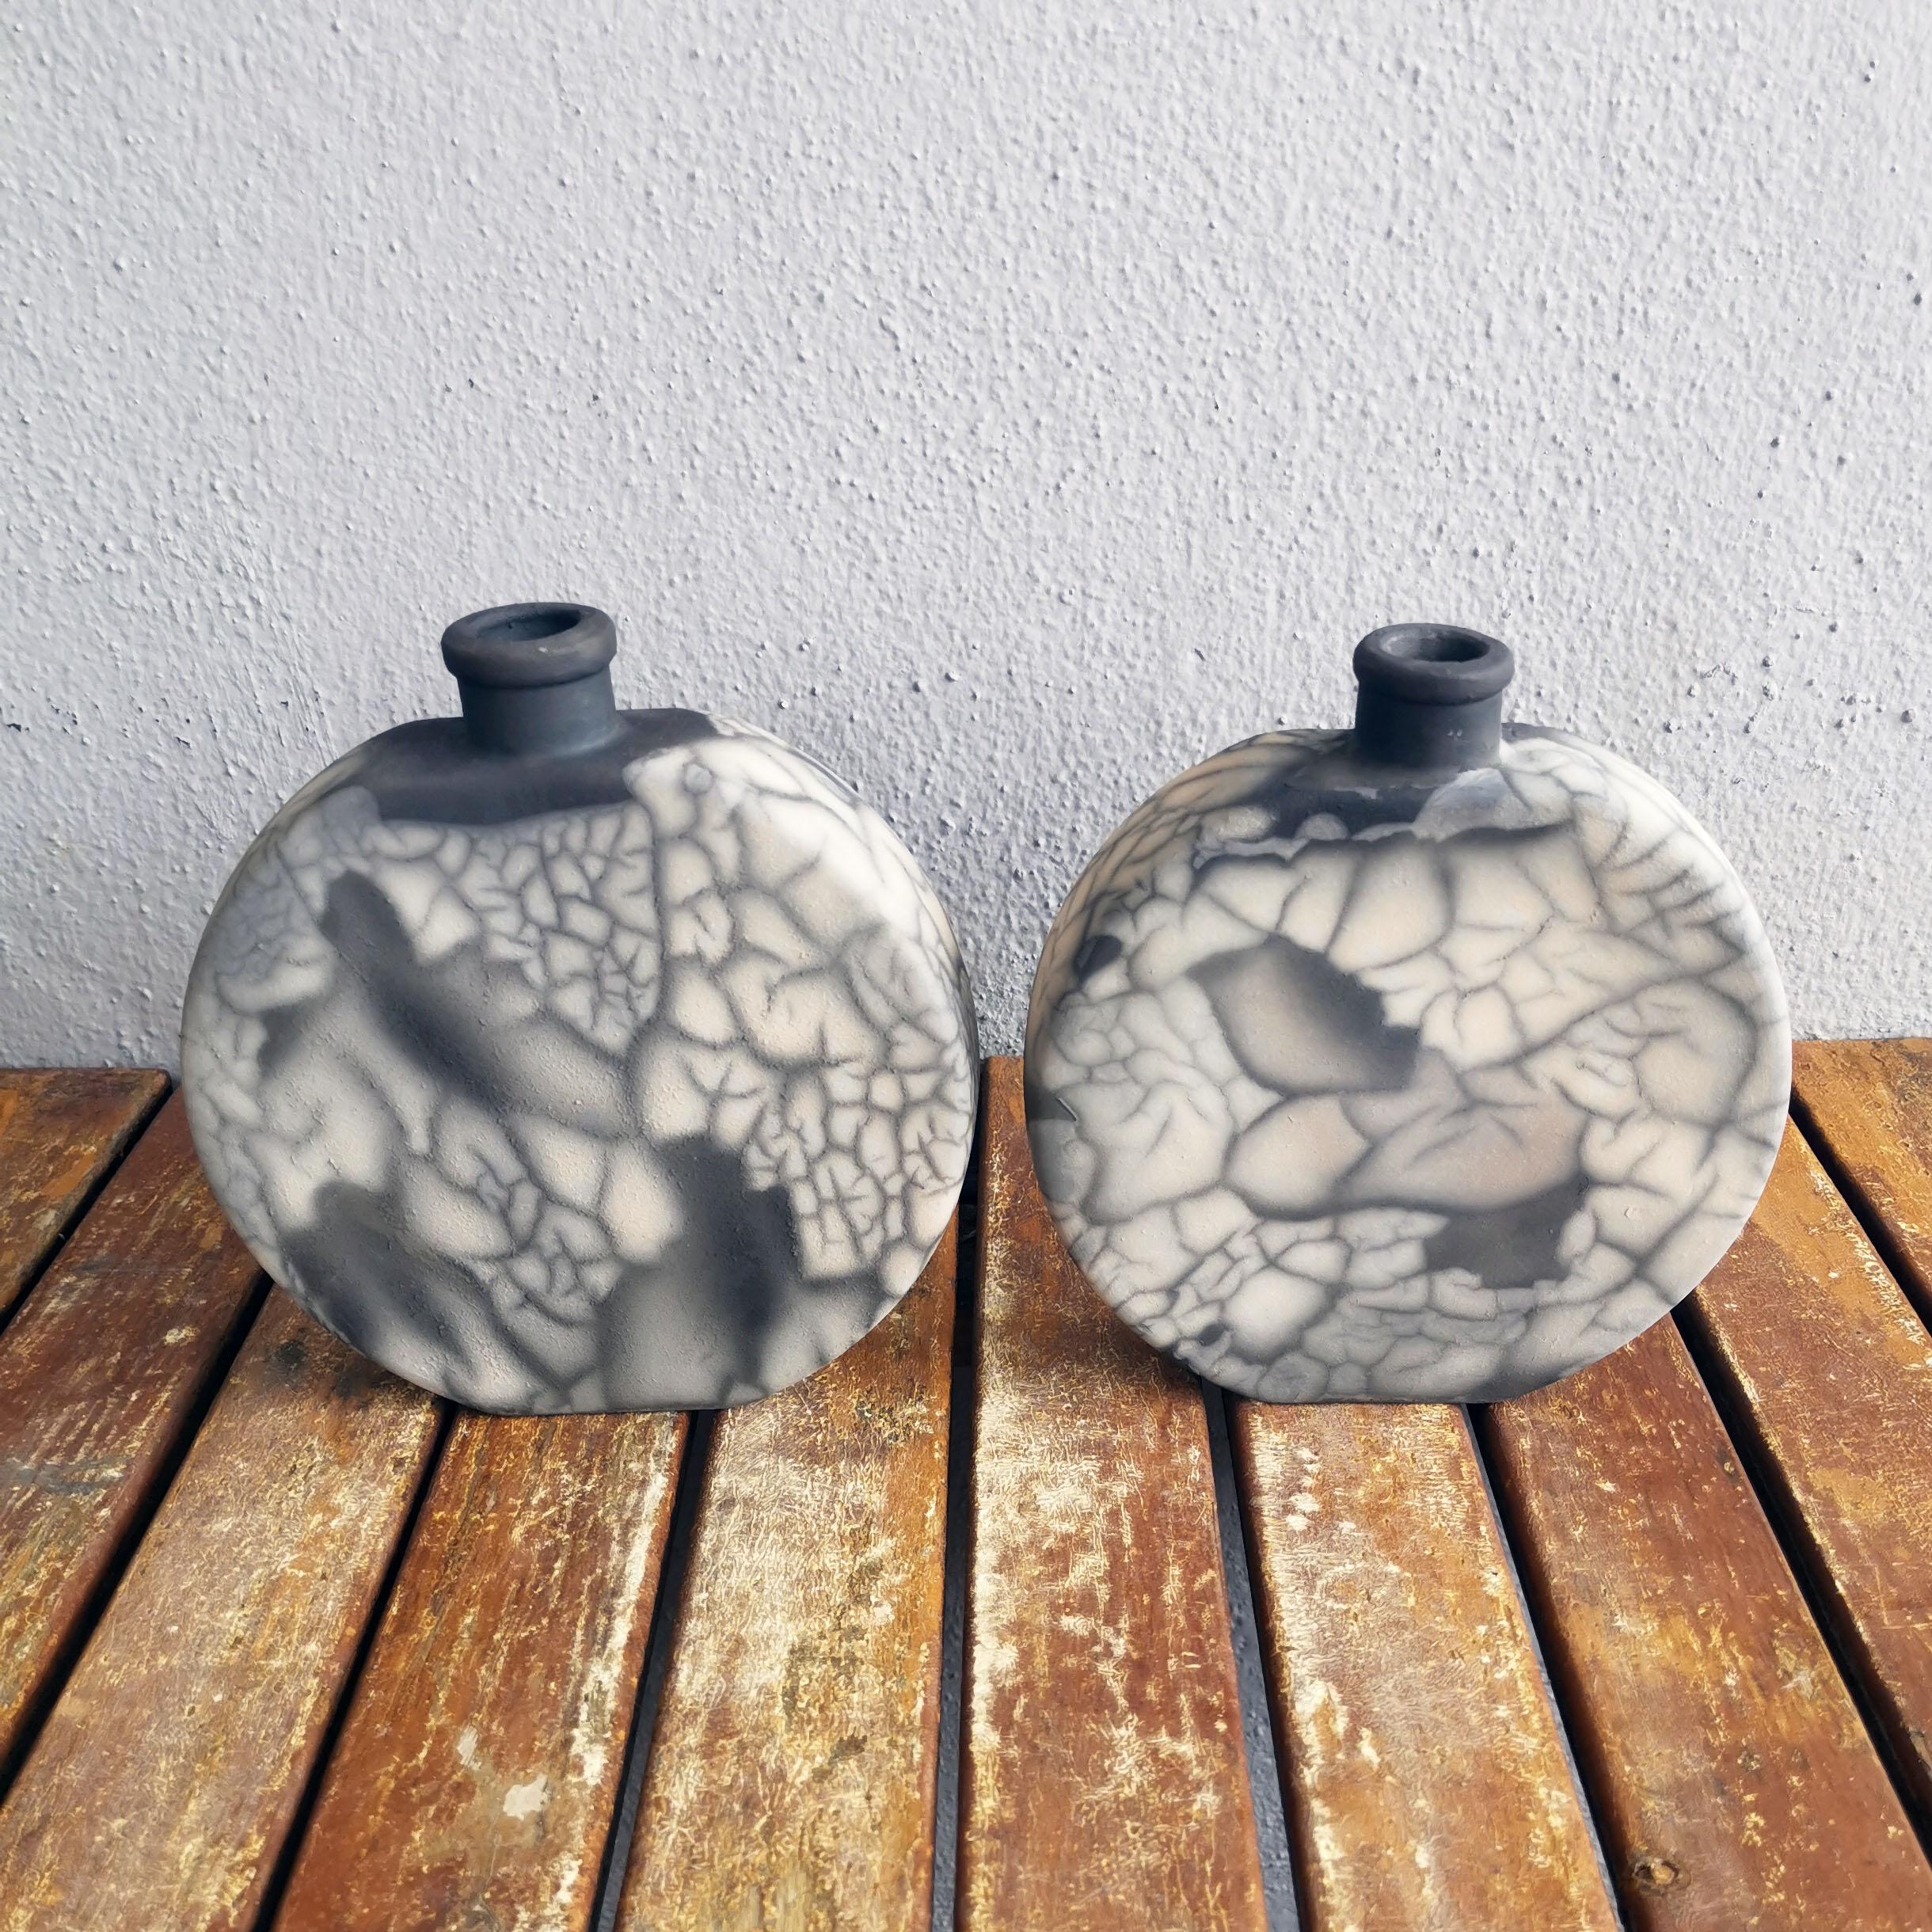 You get :

2 Units of Kumo Vase in a finish of your choice.

Kumo ( 雲 ) ~ (n) cloud

Our Kumo Vase is a flattened globe vase with a narrow base and a narrow mouth. Its contemporary shape promises to blend well with any interior style.

The Kumo vase